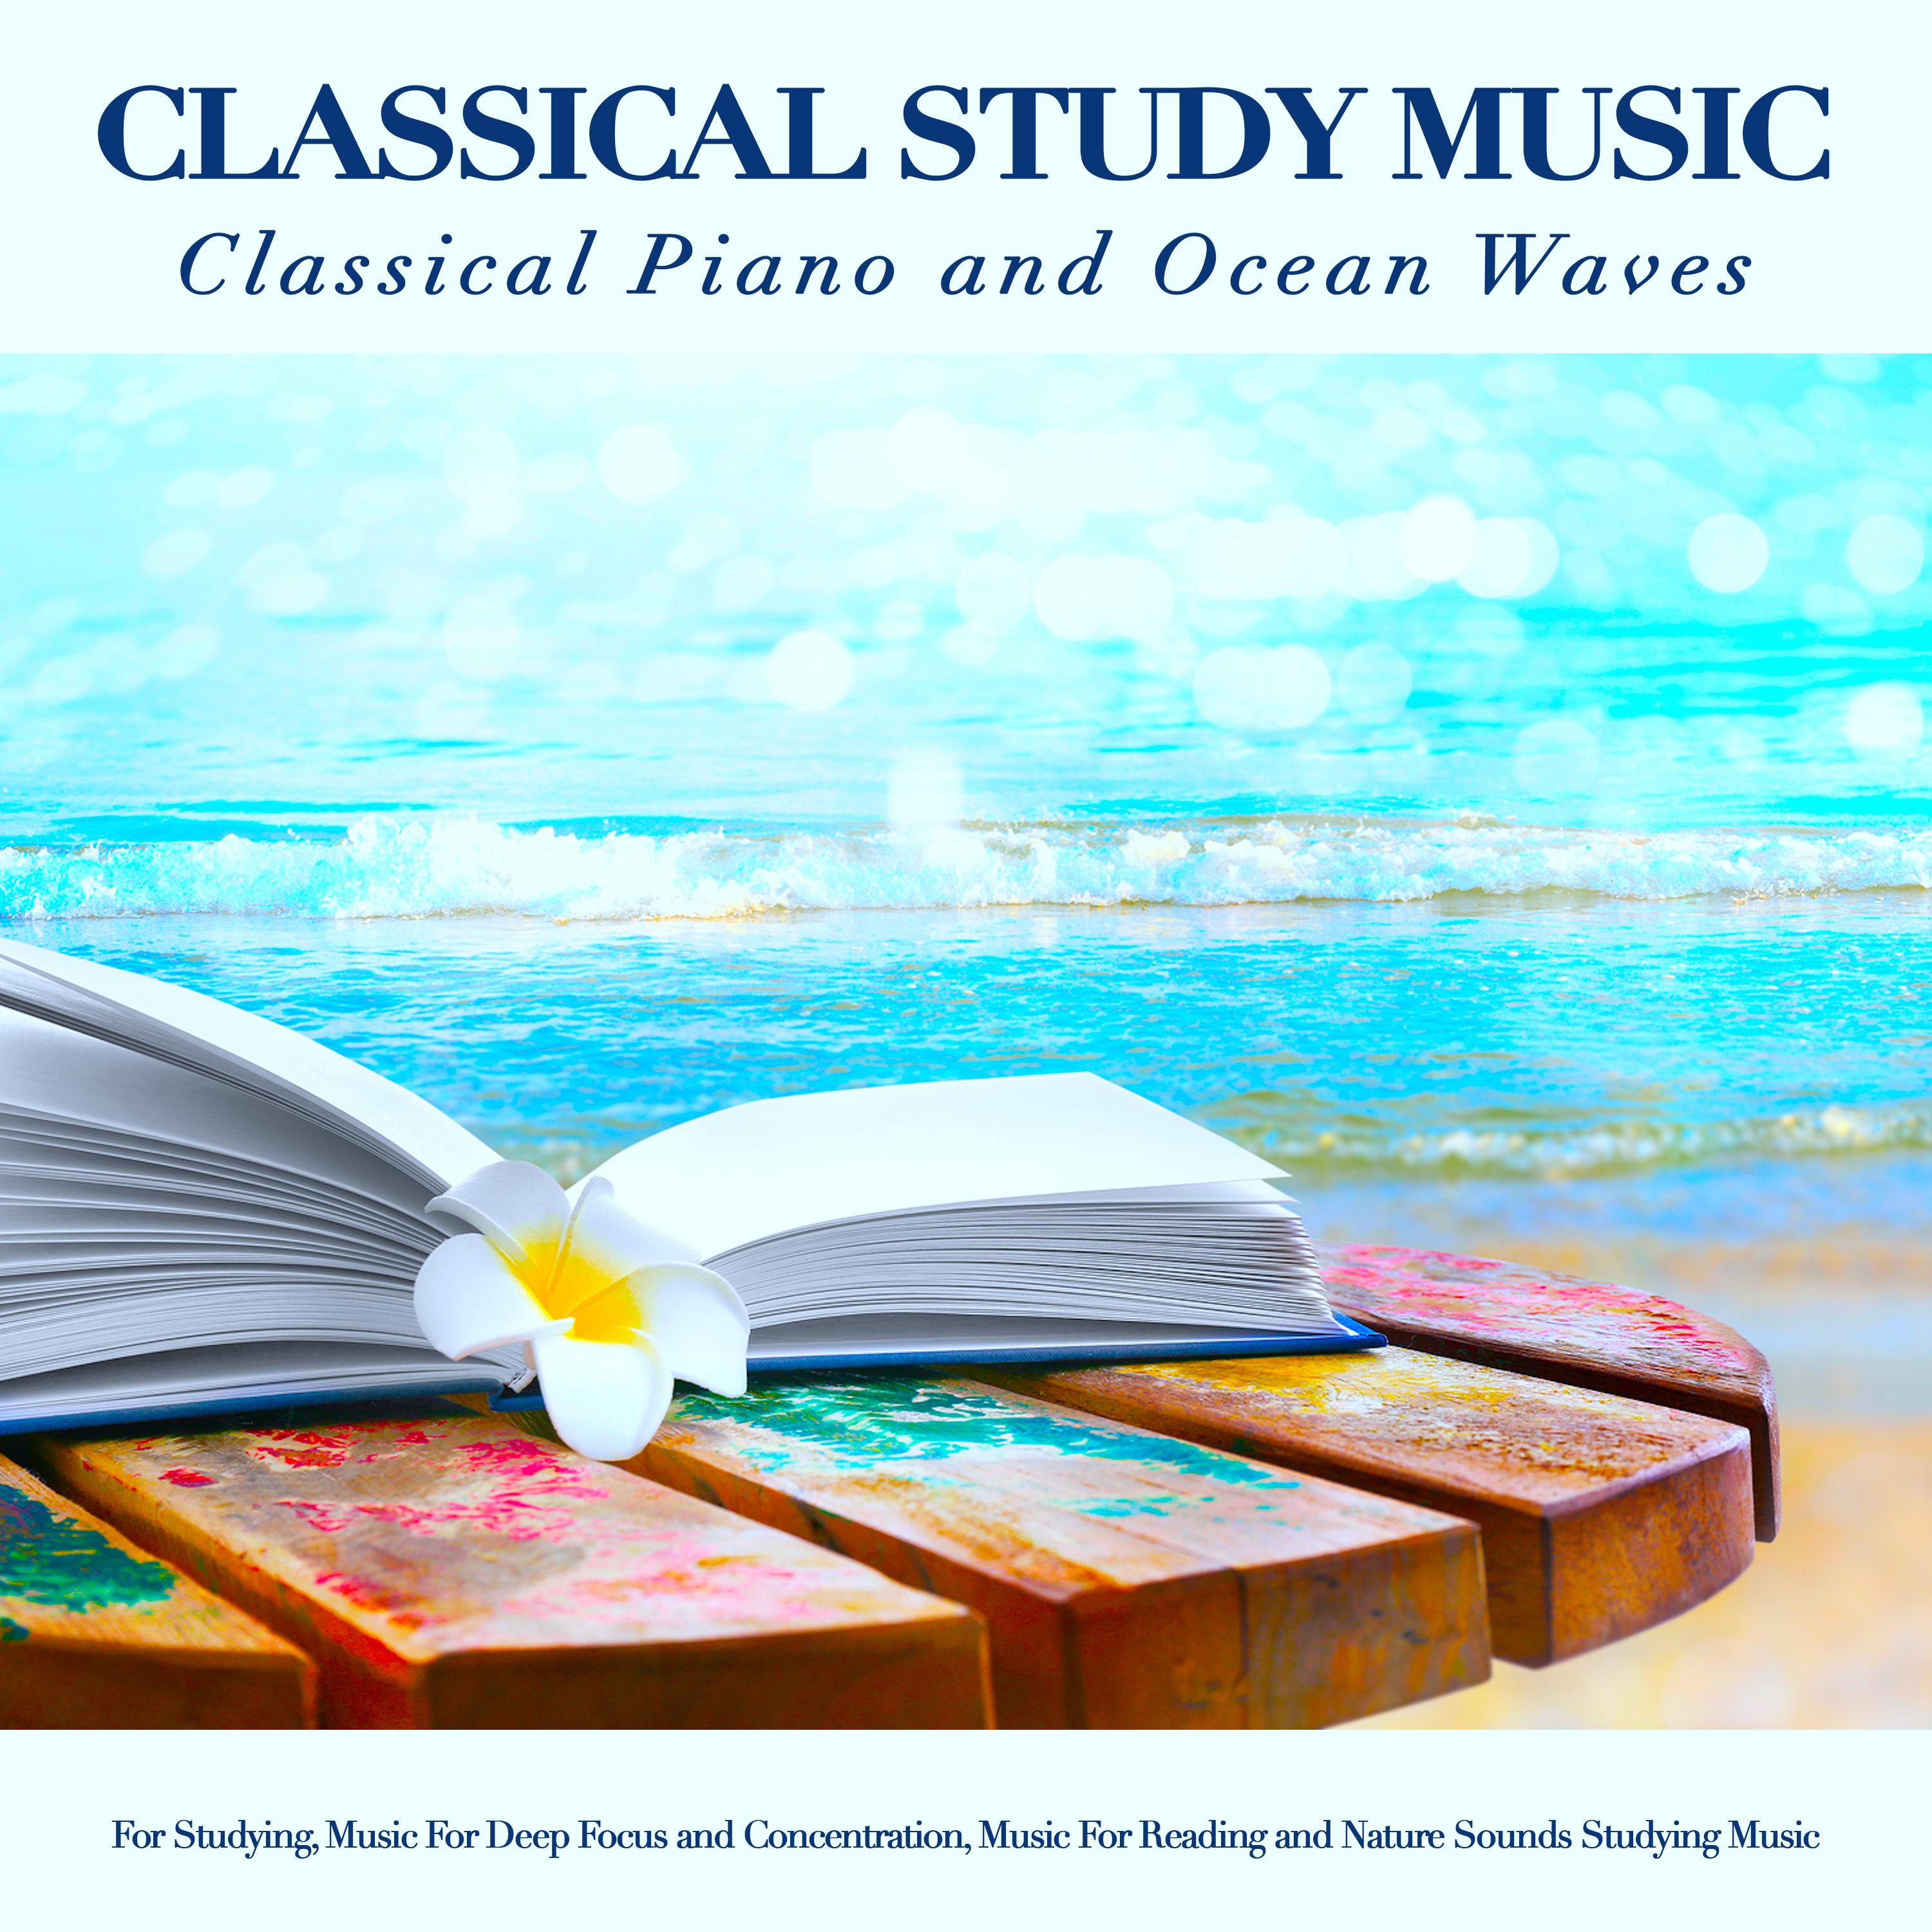 Pathetique - Beethoven - Classical Study Music - Ocean Waves Sounds - Classical Piano for Studying